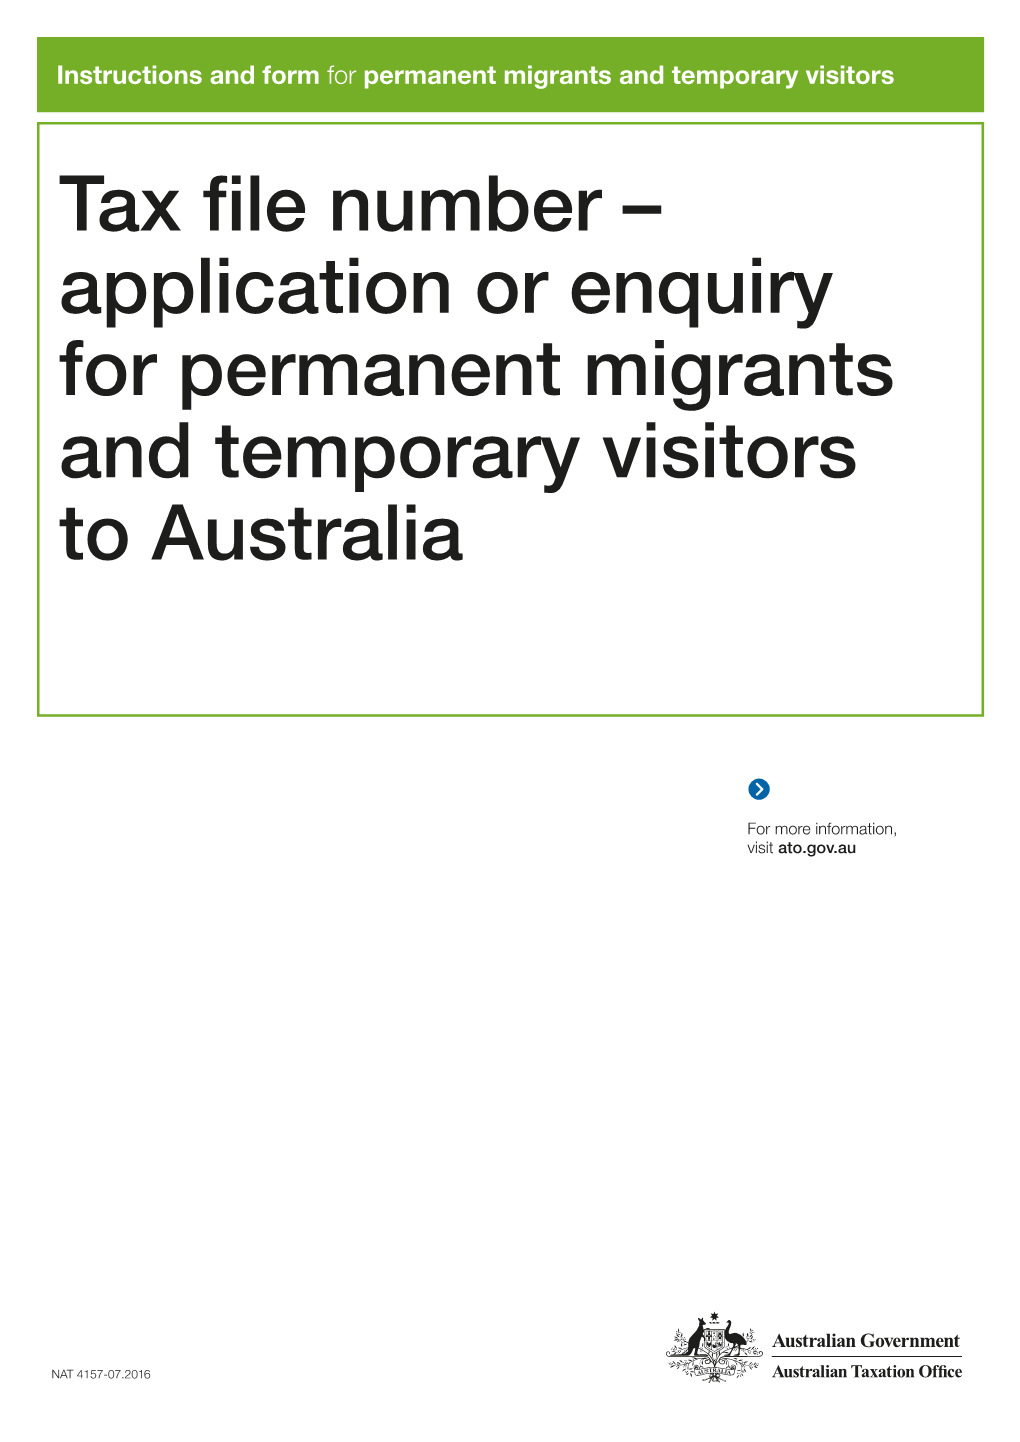 Tax File Number – Application Or Enquiry for Permanent Migrants and Temporary Visitors to Australia